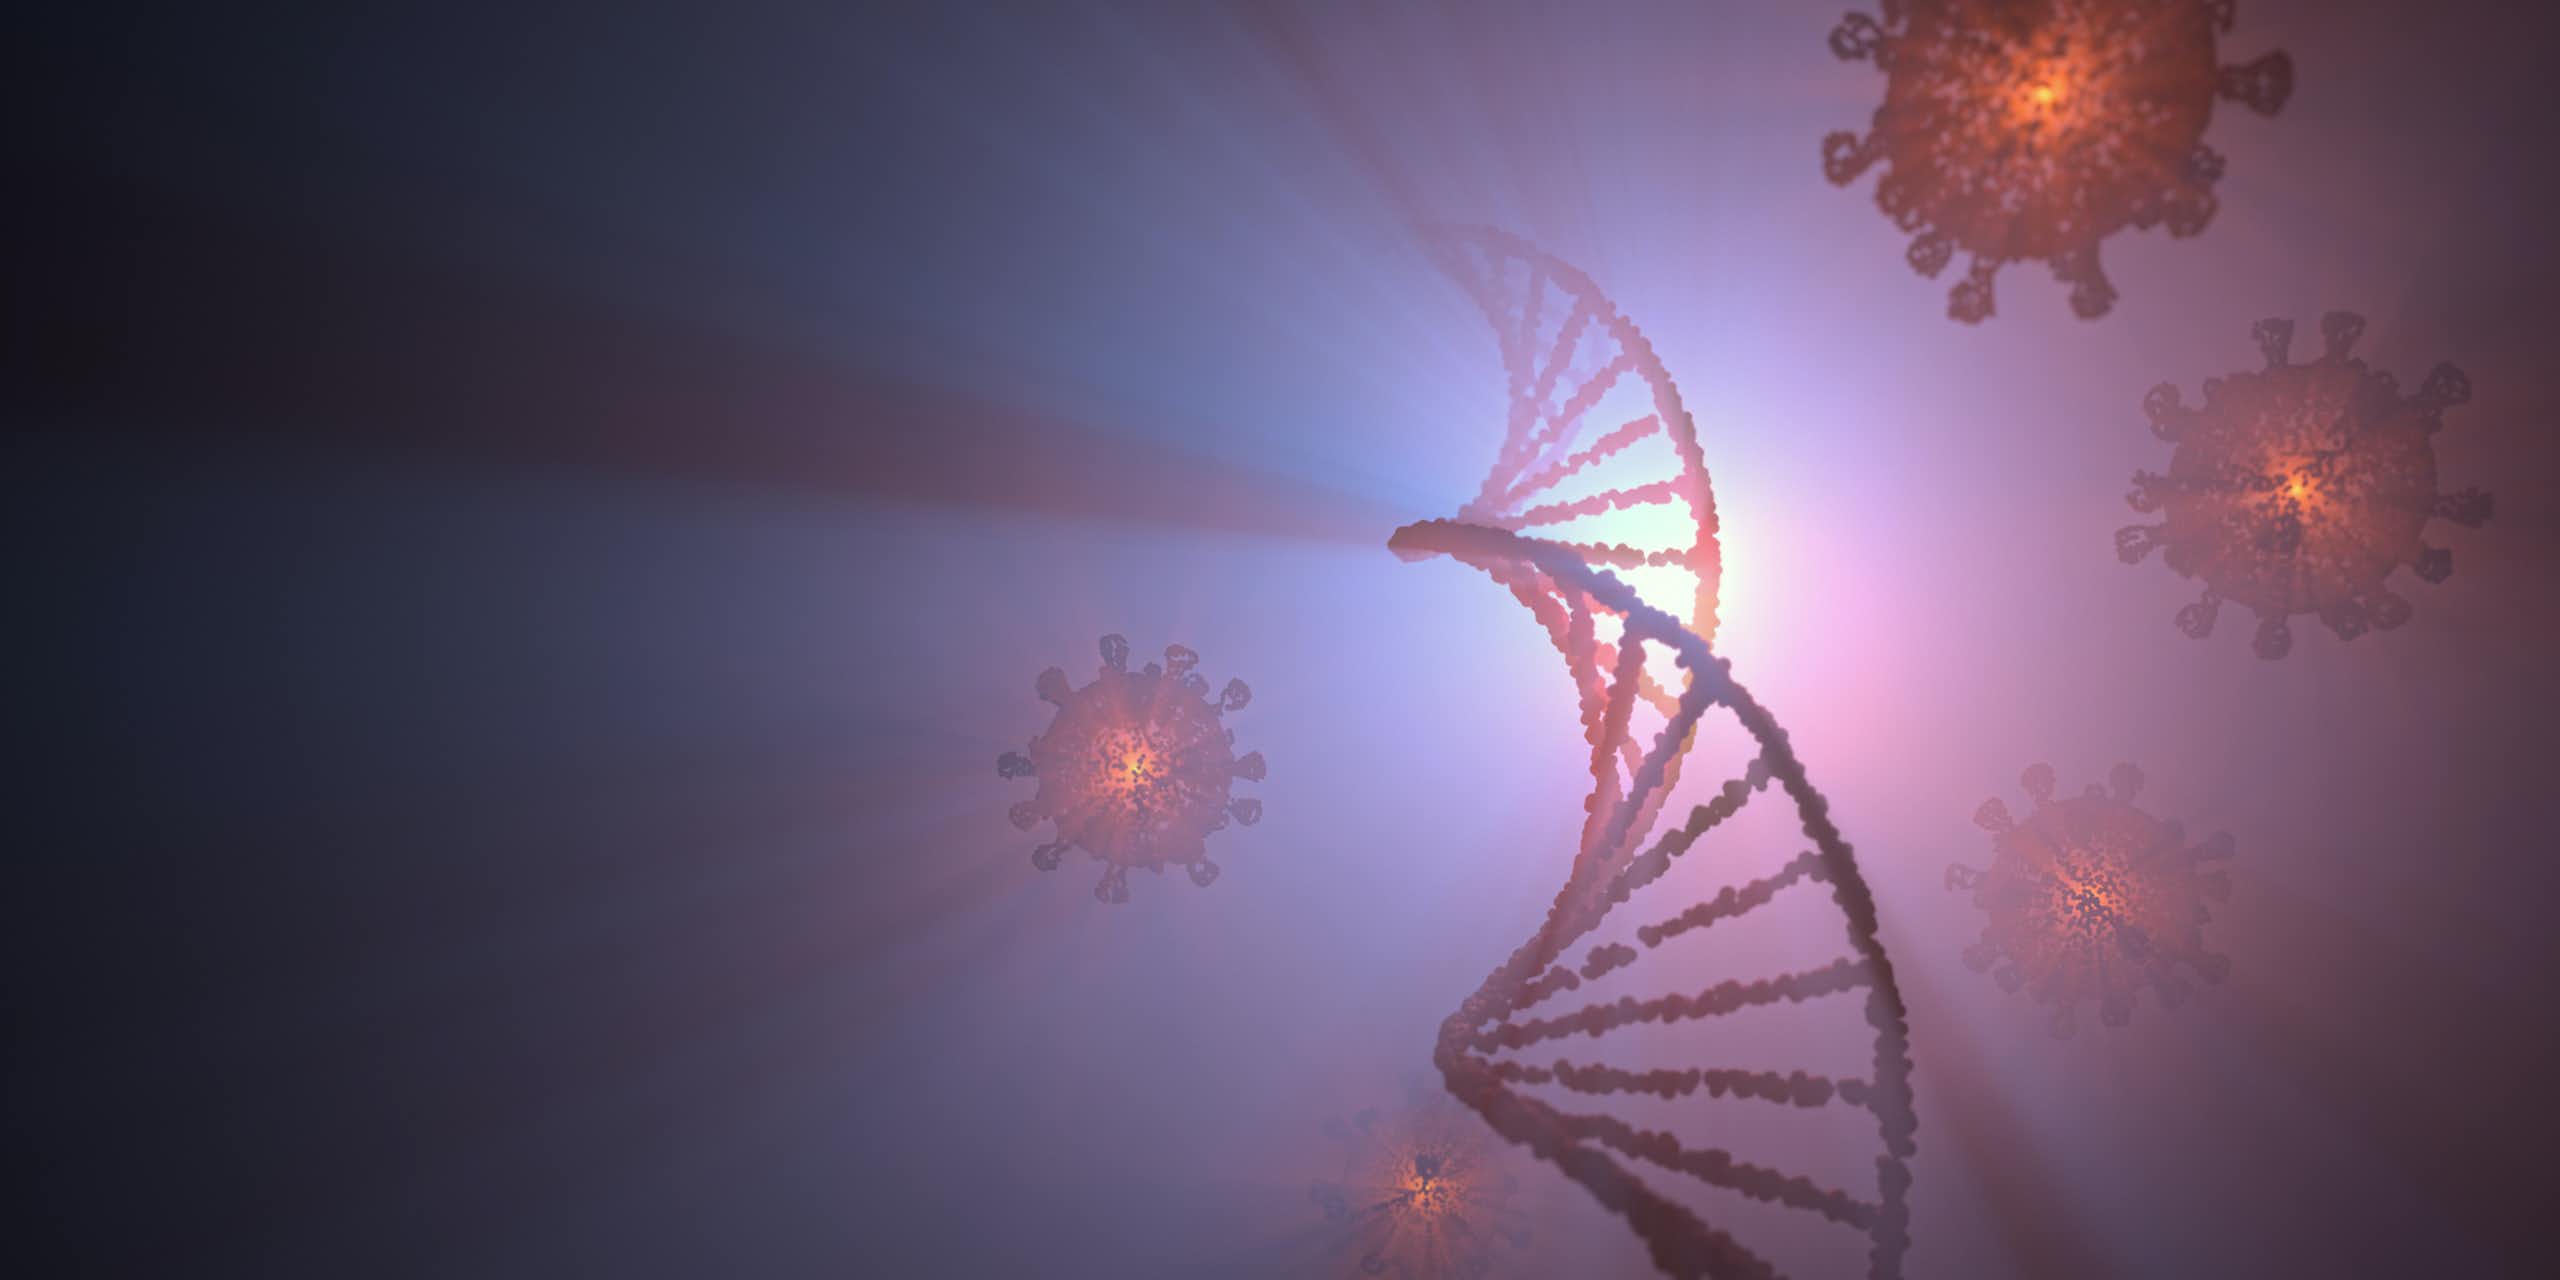  Illustration of DNA helix stretching up into an opaque light as virus particles float around it